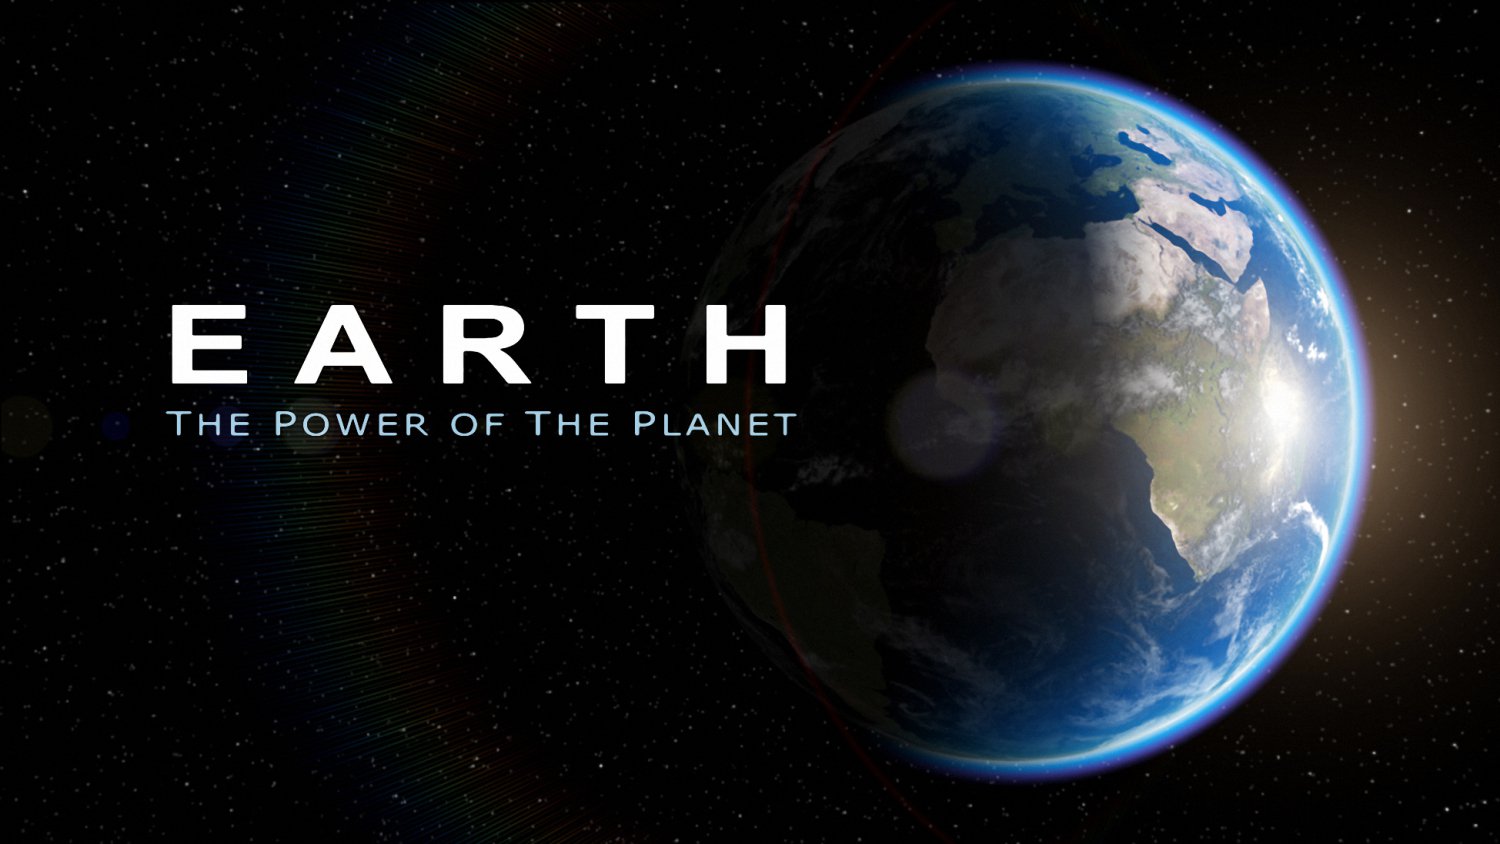 Earth: The Power of the Planet